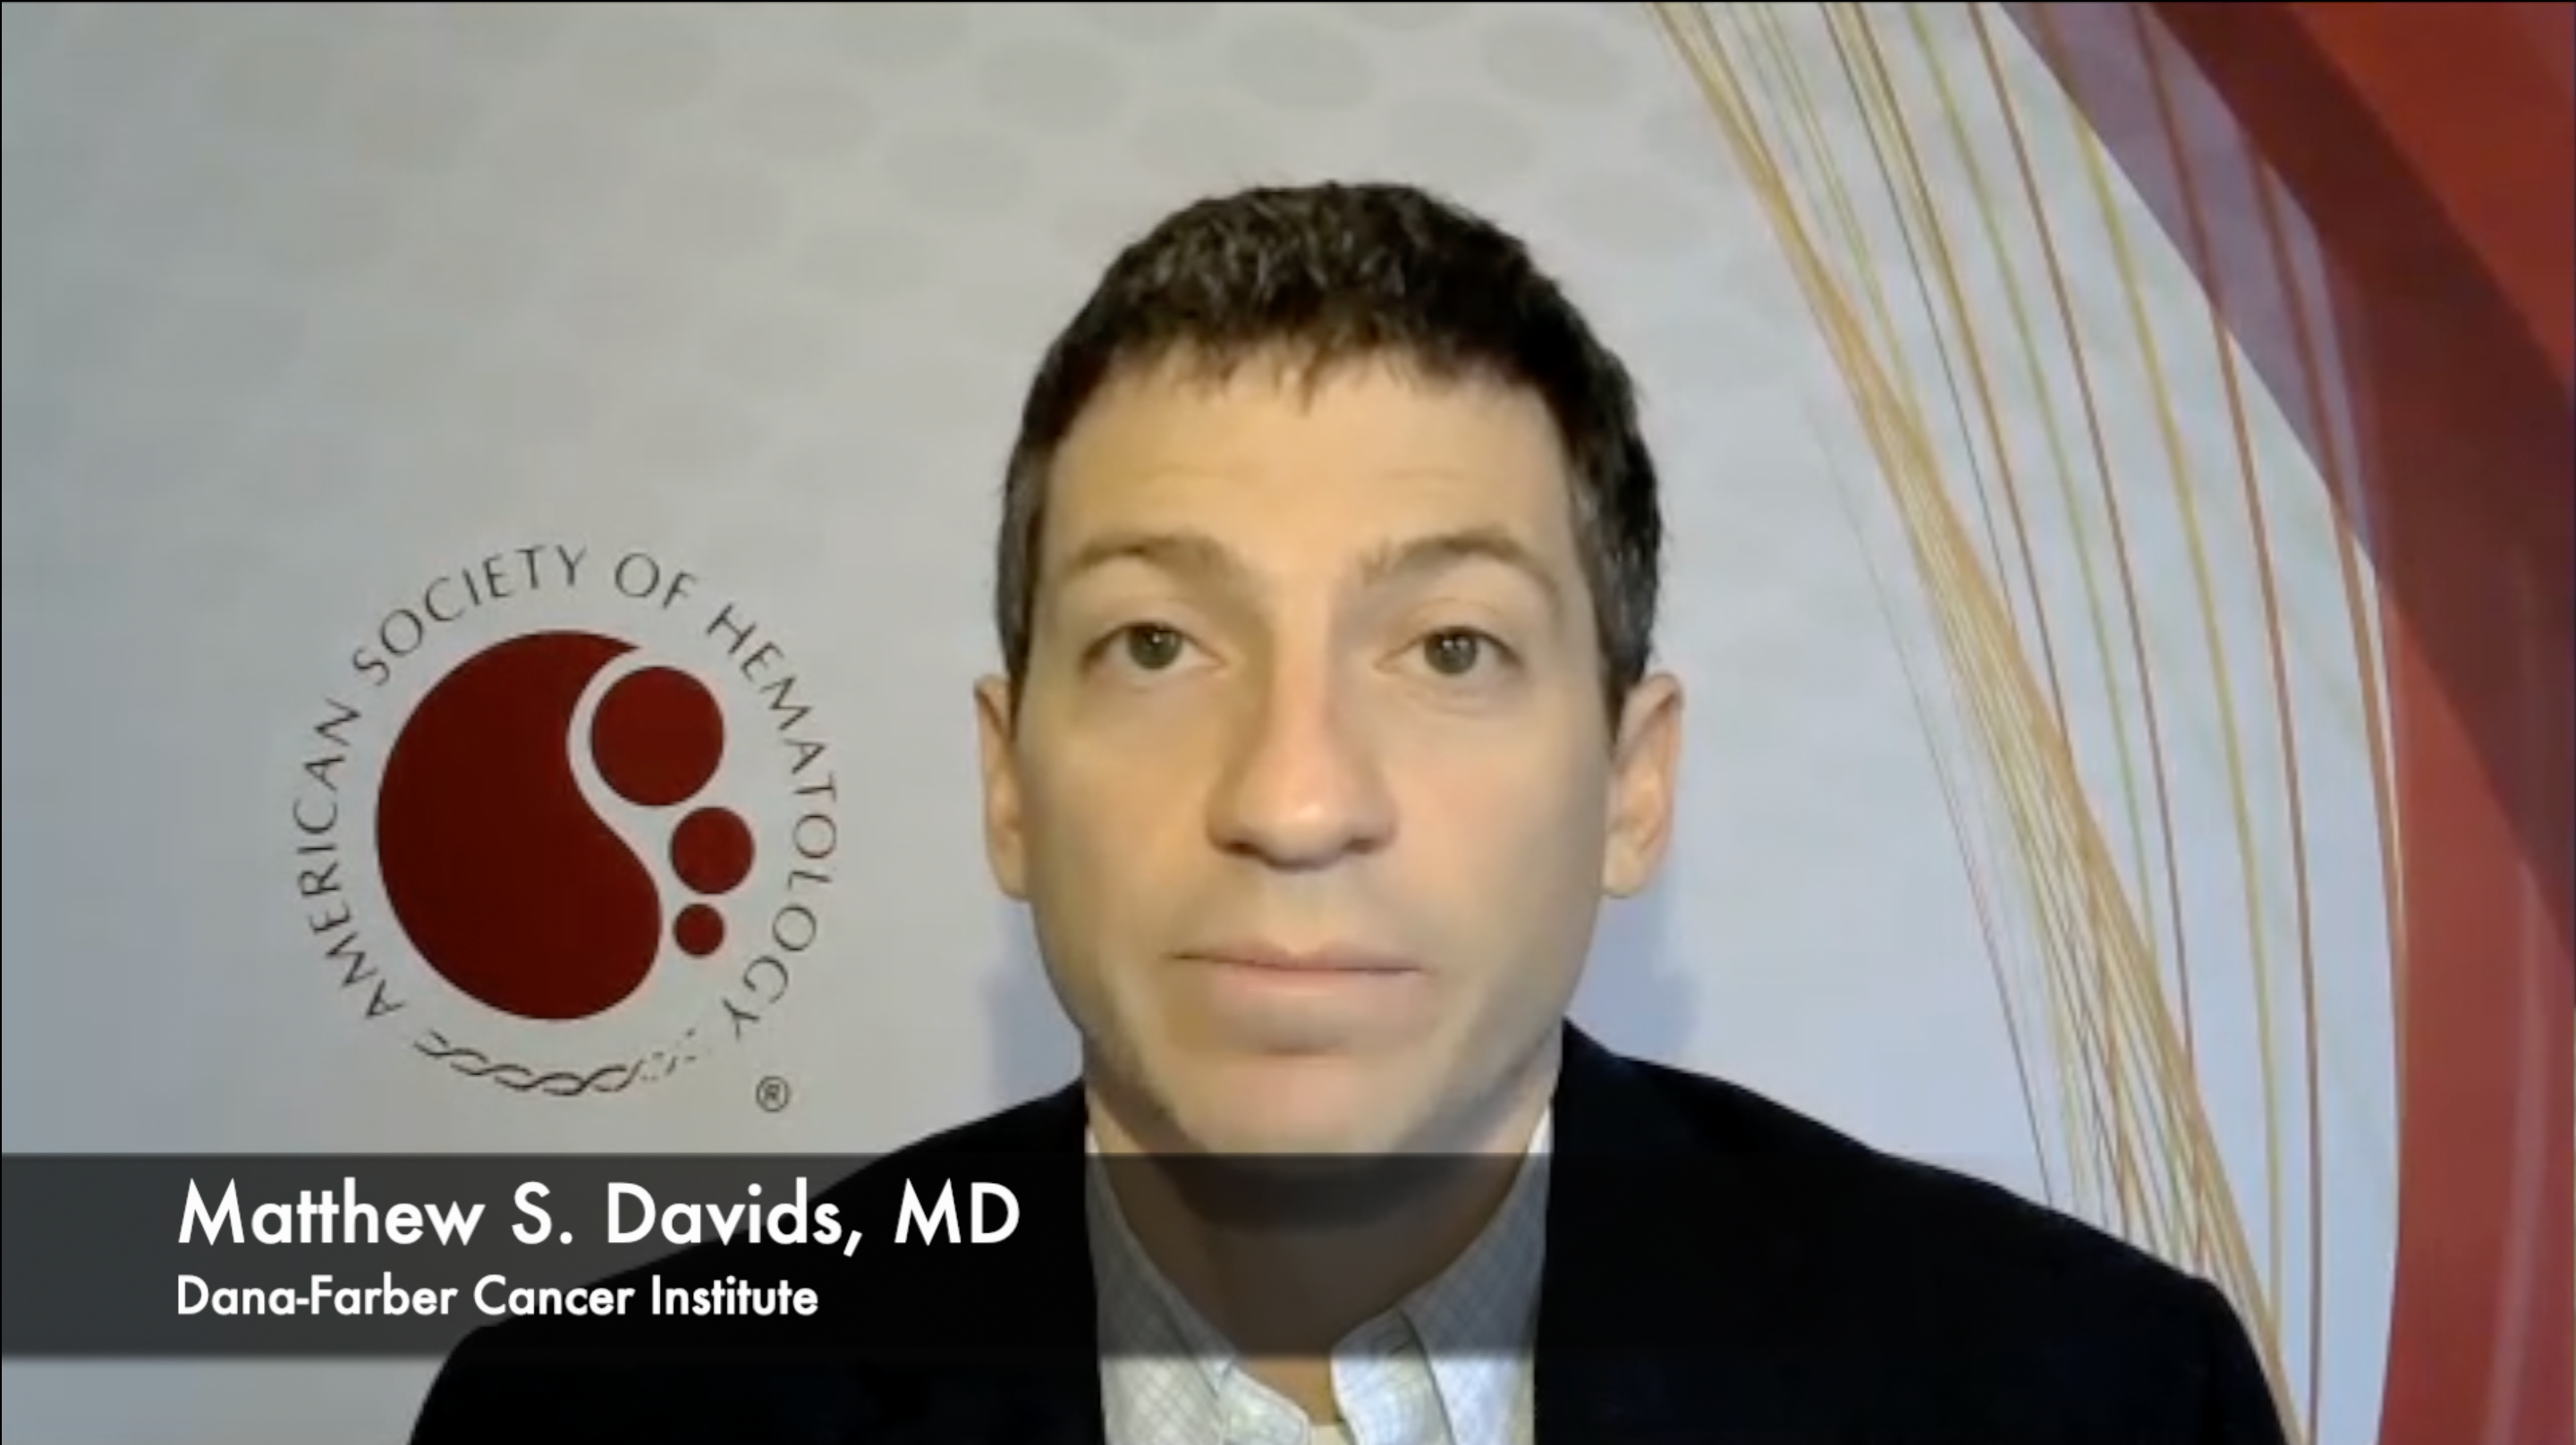 Matthew S. Davids, MD, MMSc, Discusses Rationale for the MAJIC Study of Venetoclax Plus Acalabrutinib in CLL